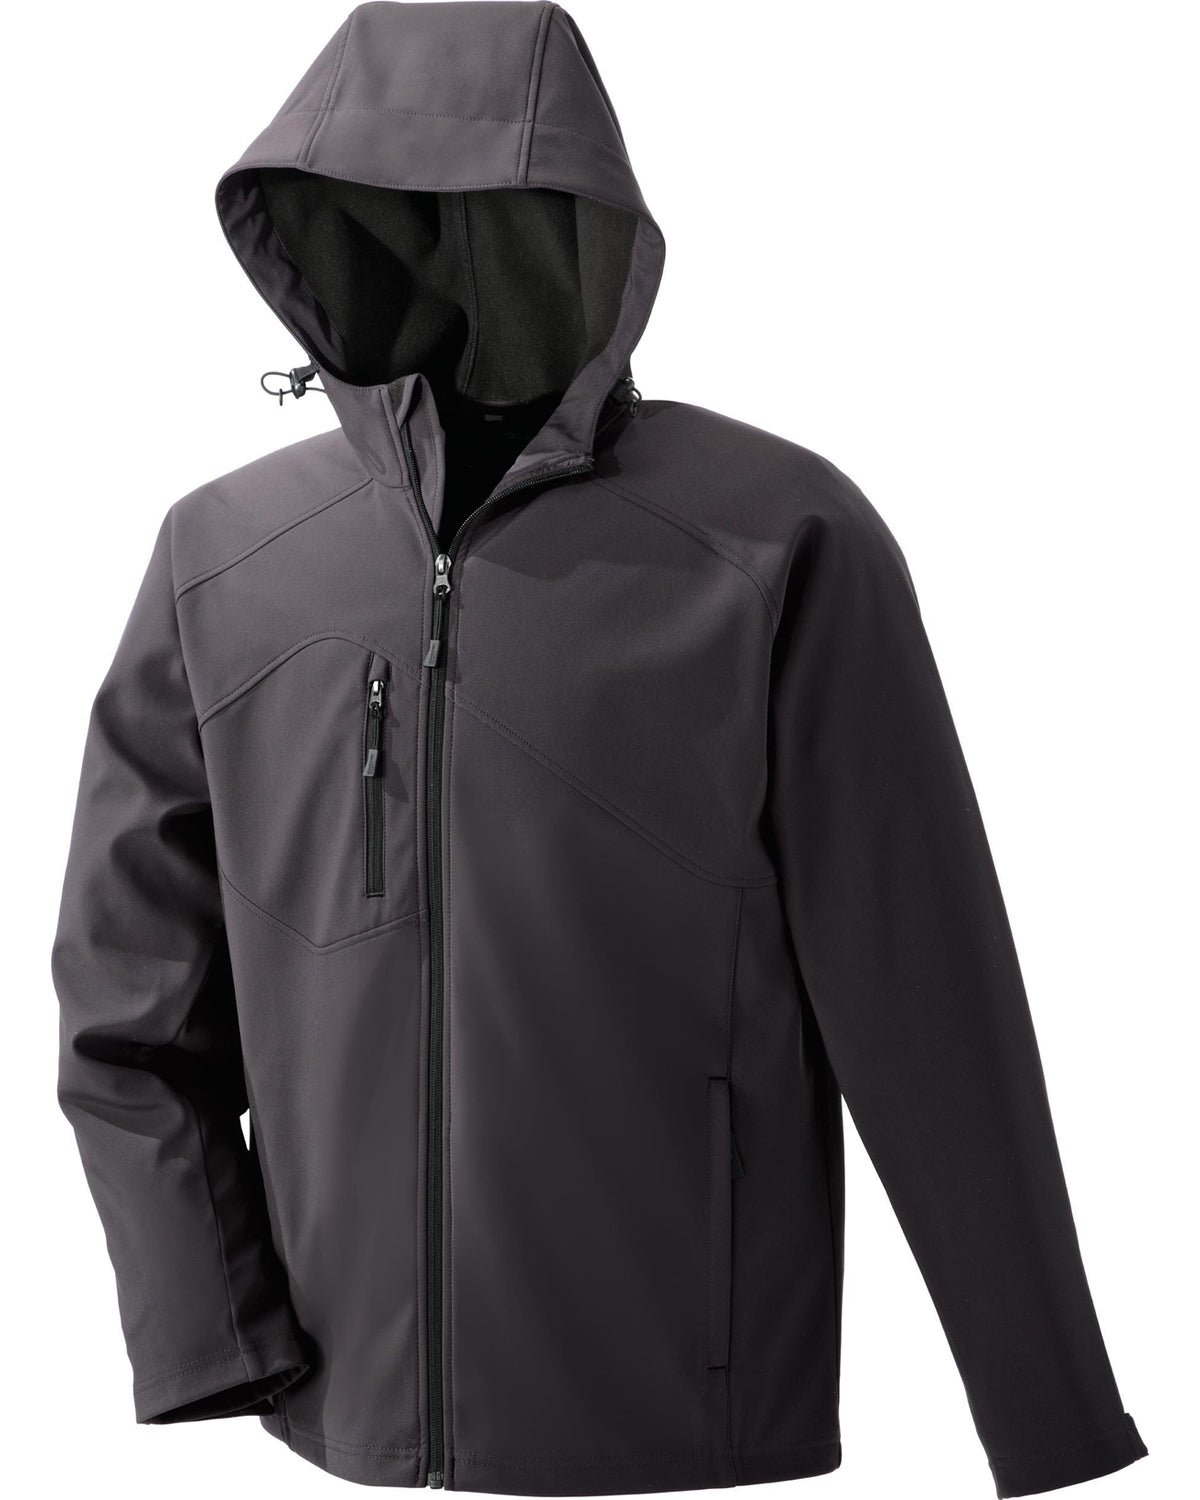 Ash City® North End Men's Prospect Two-Layer Fleece Bonded Soft Shell Hooded Jacket